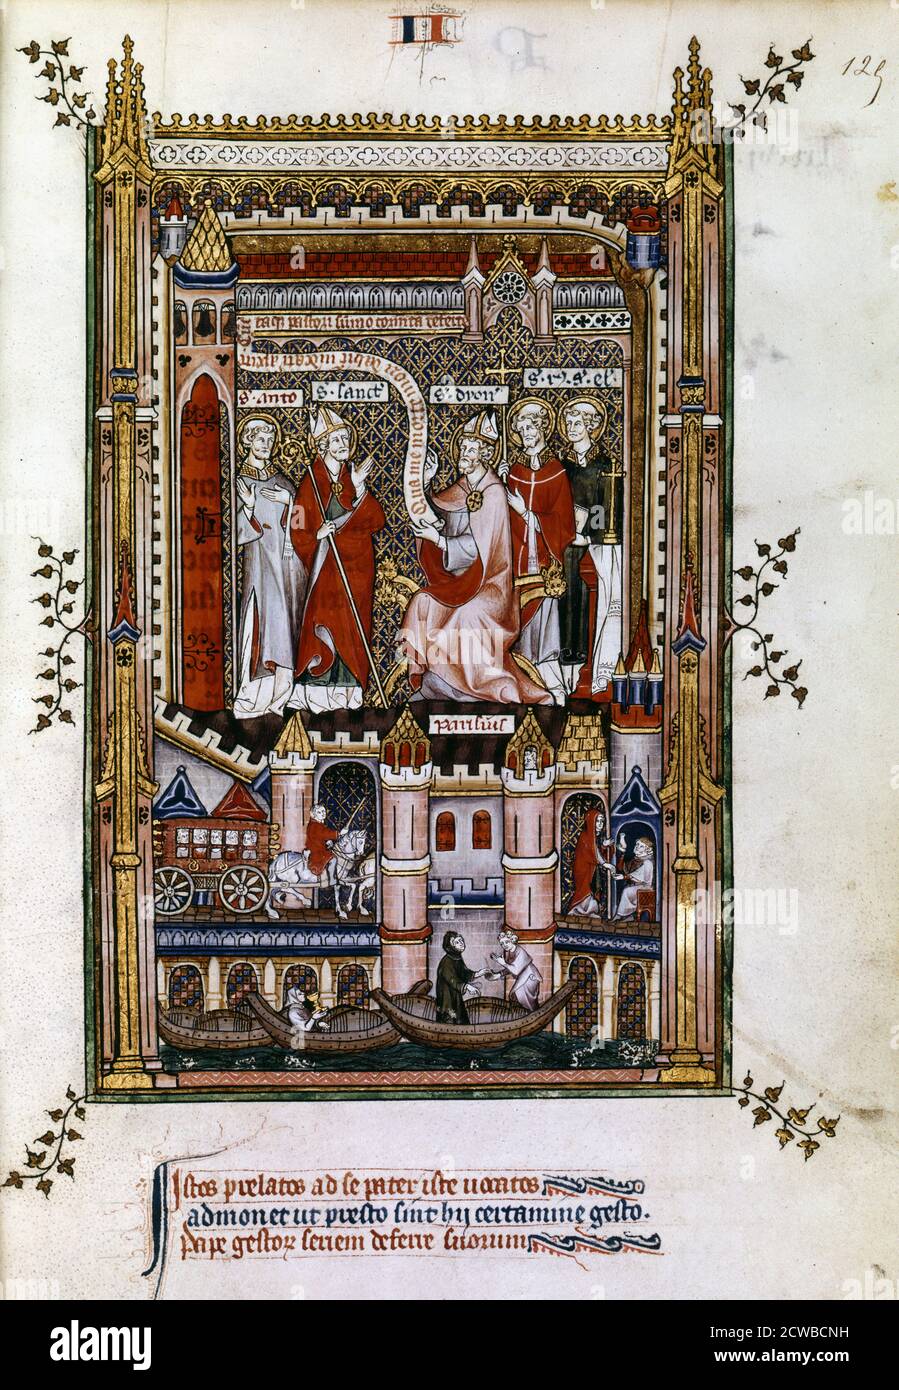 St Denis, 1317. St Denis, accompanied by St Rusticus and St Eleutherius, commissions St Saintin and St Antonin to write the story of his life. Manuscript illustration from a work on the life of St Denis (died c258 AD), written by Yves, a monk at the Abbey of St Denis. The book depicts the torture and martyrdom of the saint by the Roman governor Fescenninus Sisinnius. From the collection of the Bibliotheque Nationale, Paris. The artist is unknown. Stock Photo